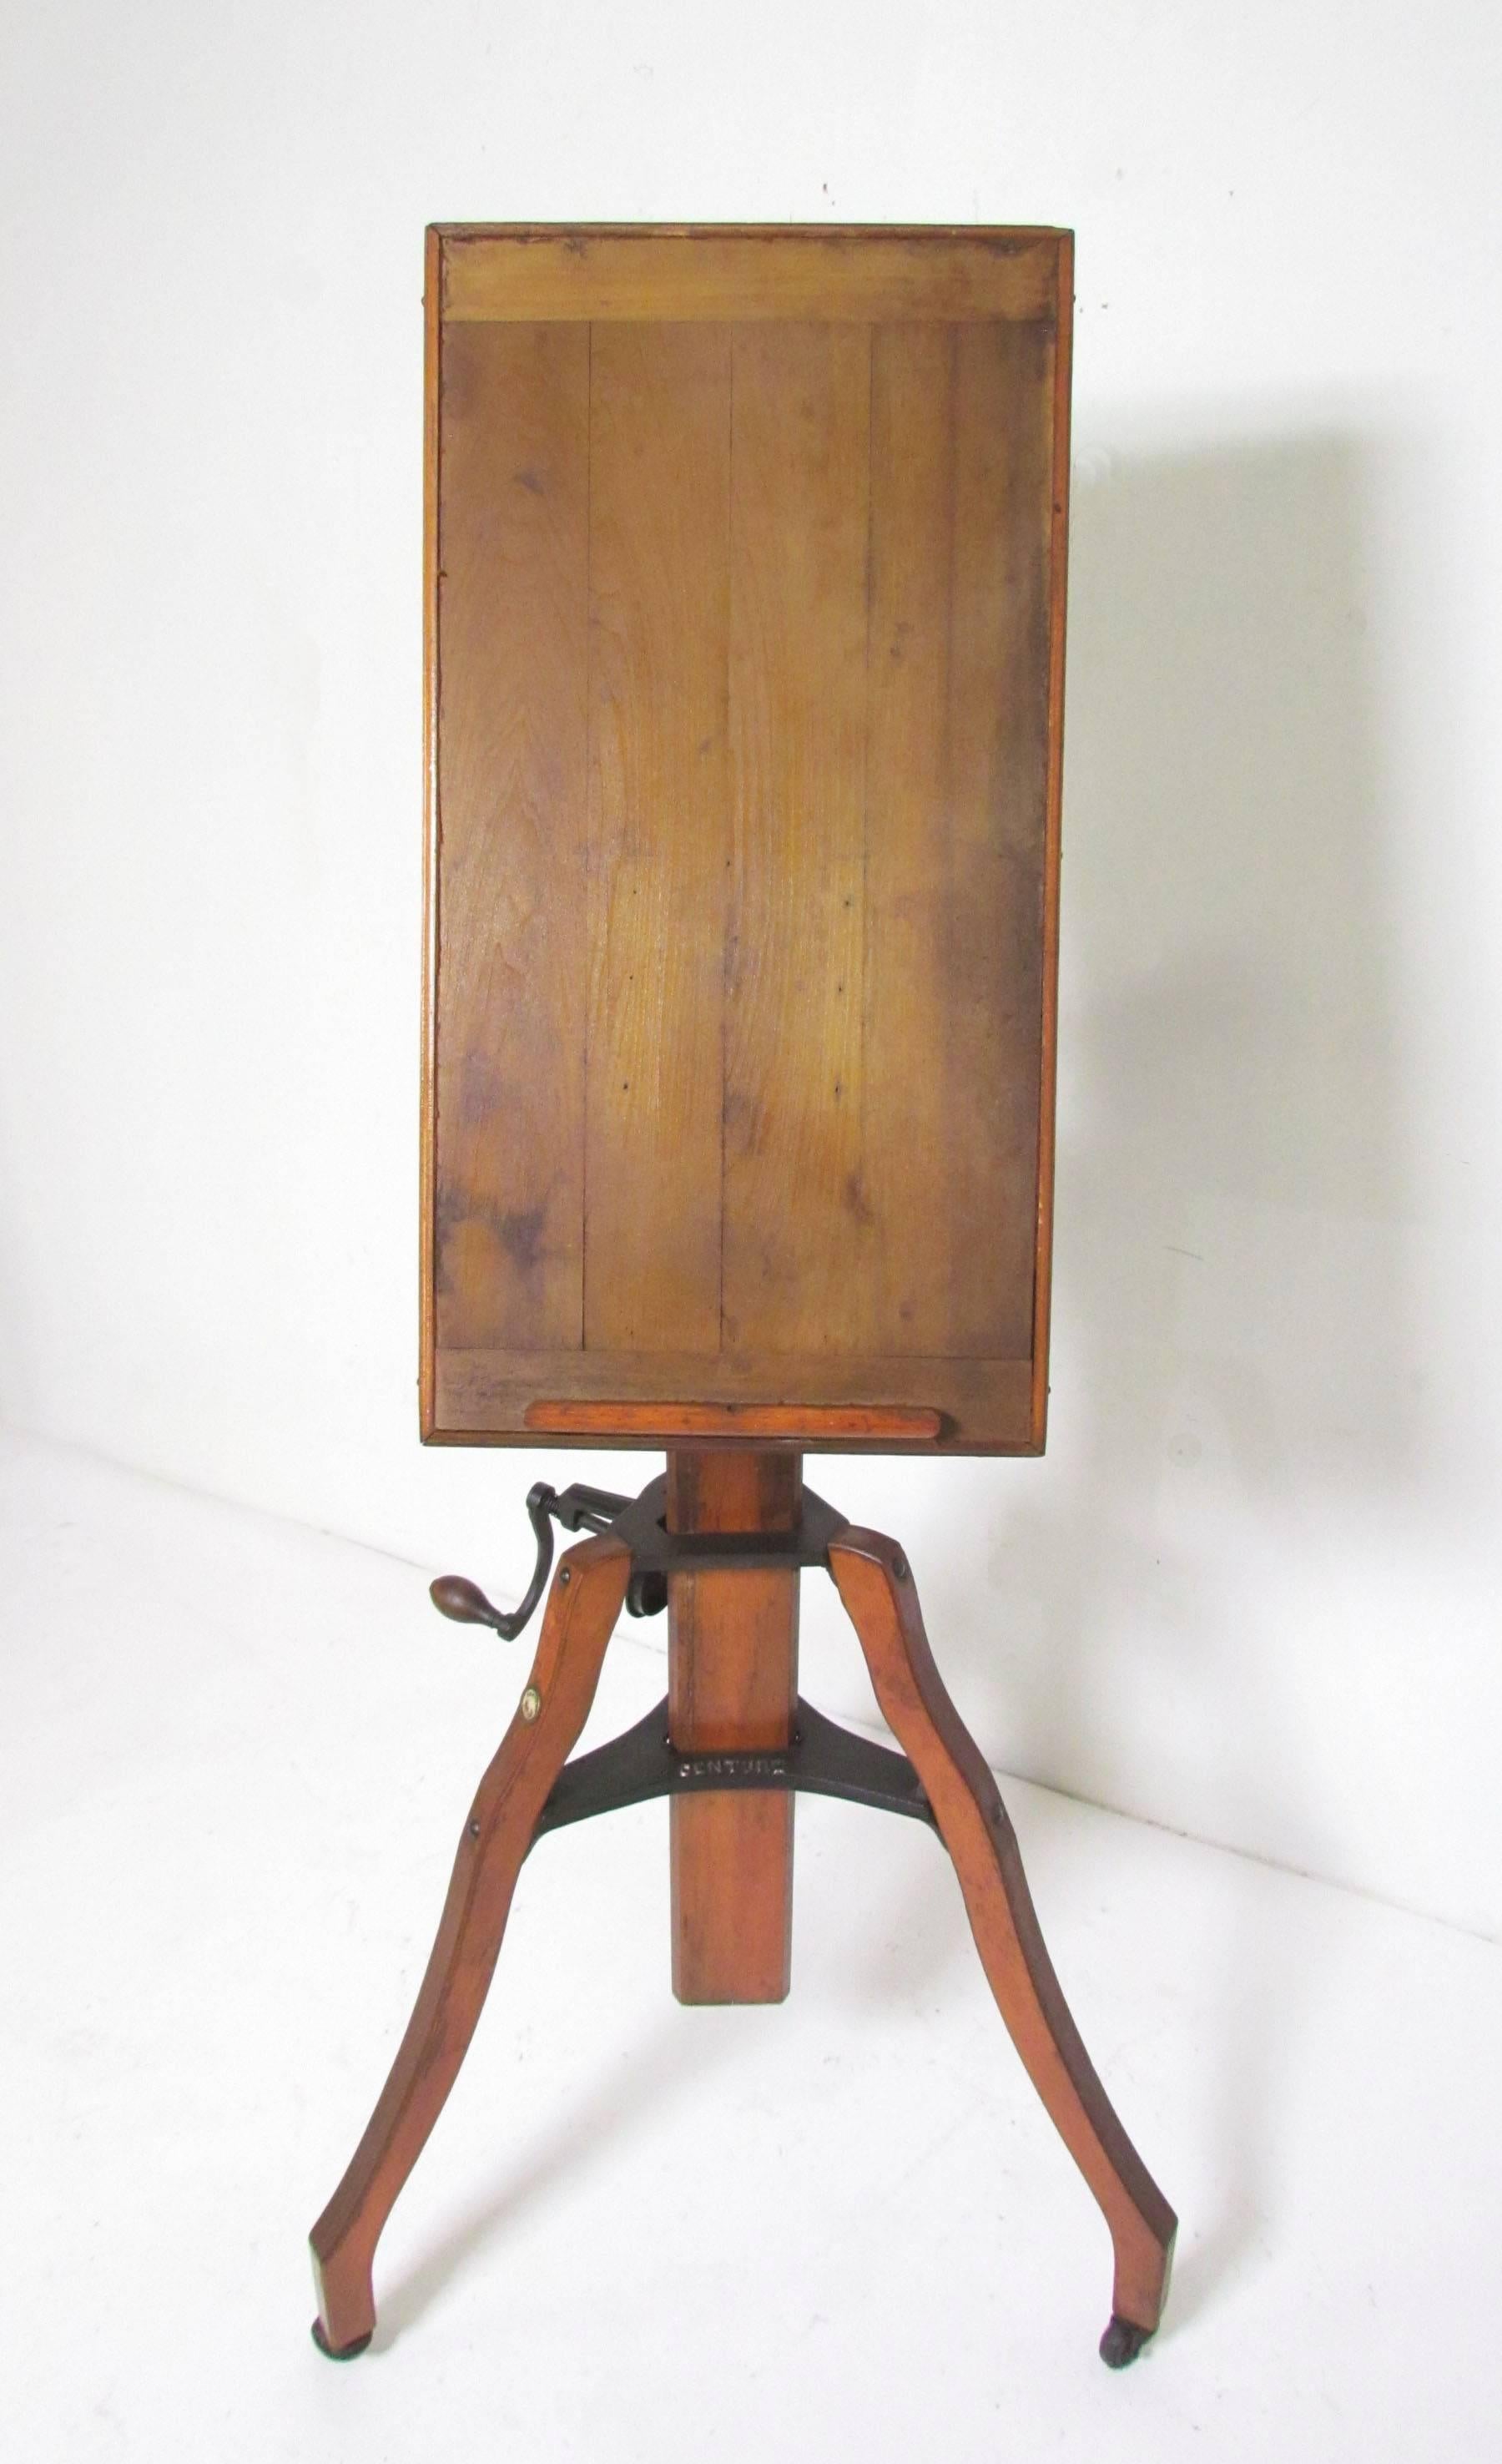 American Antique 19th Century Adjustable Artist's Sketching Easel